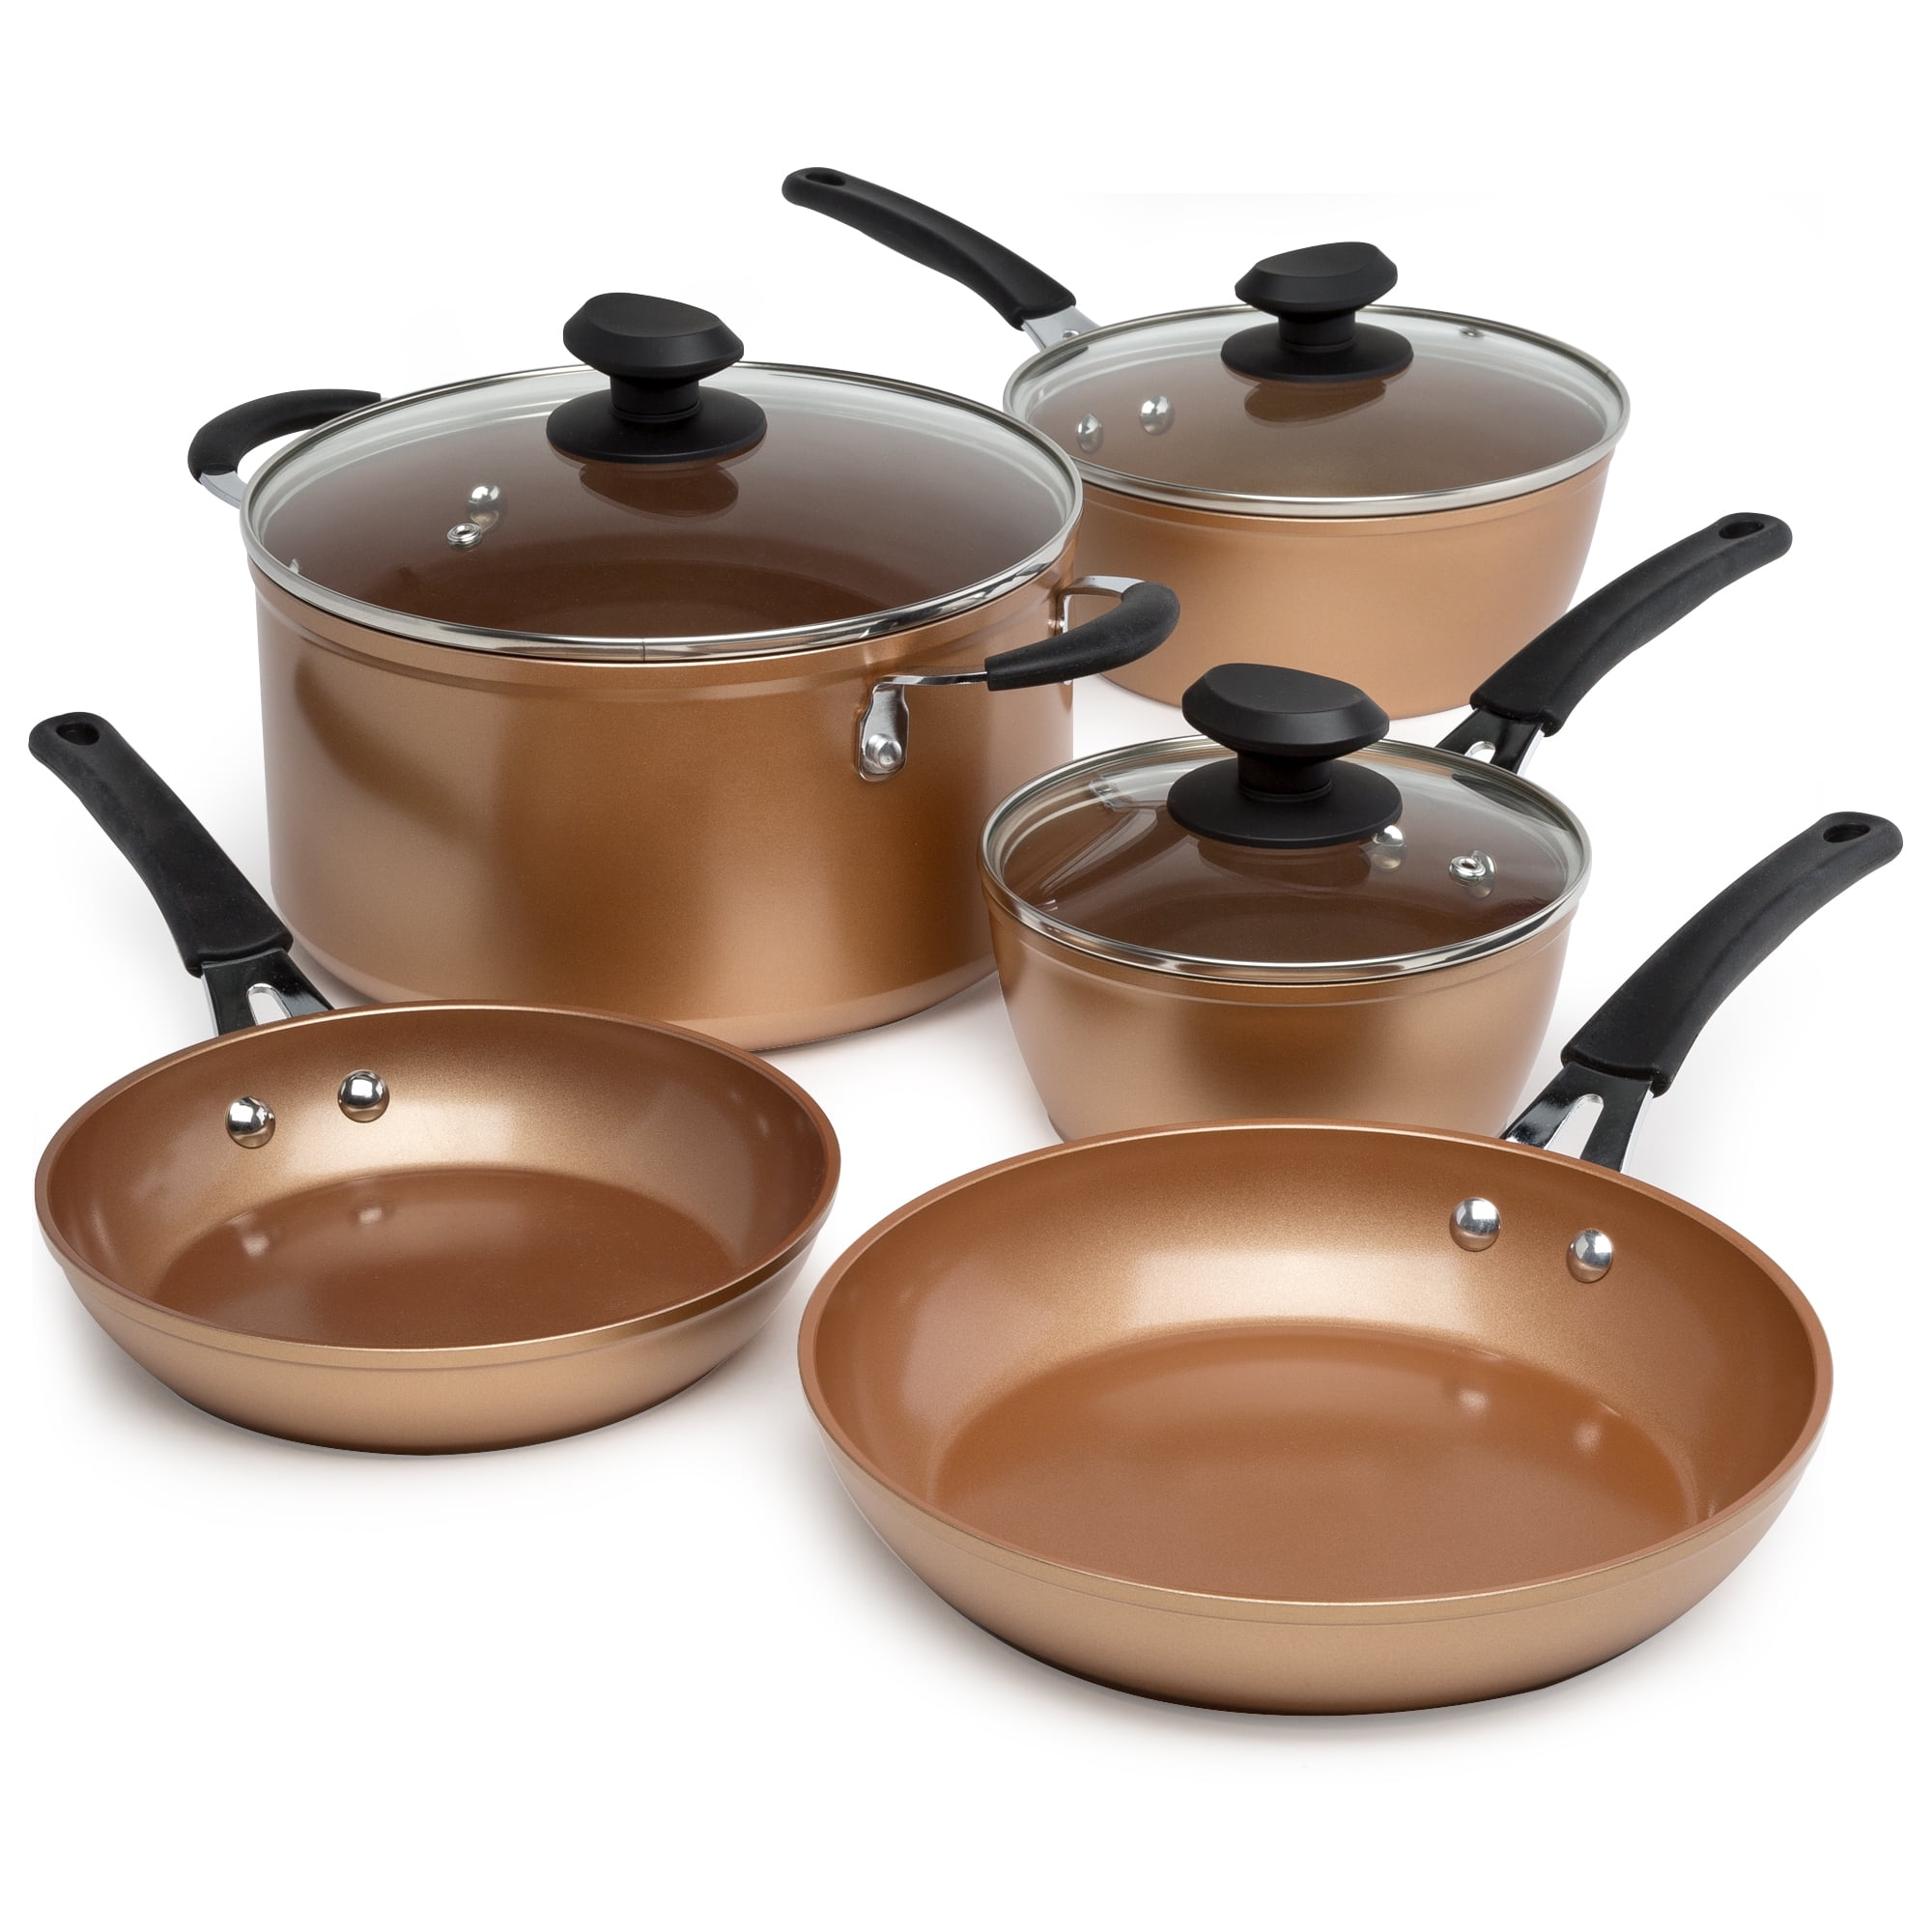 LavoHome Copper Frying Pan Set 8 & 10 Ceramic non-stick/induction Bottom Oven Safe Stainless Steel Handle No oil/butter Needed & Dis